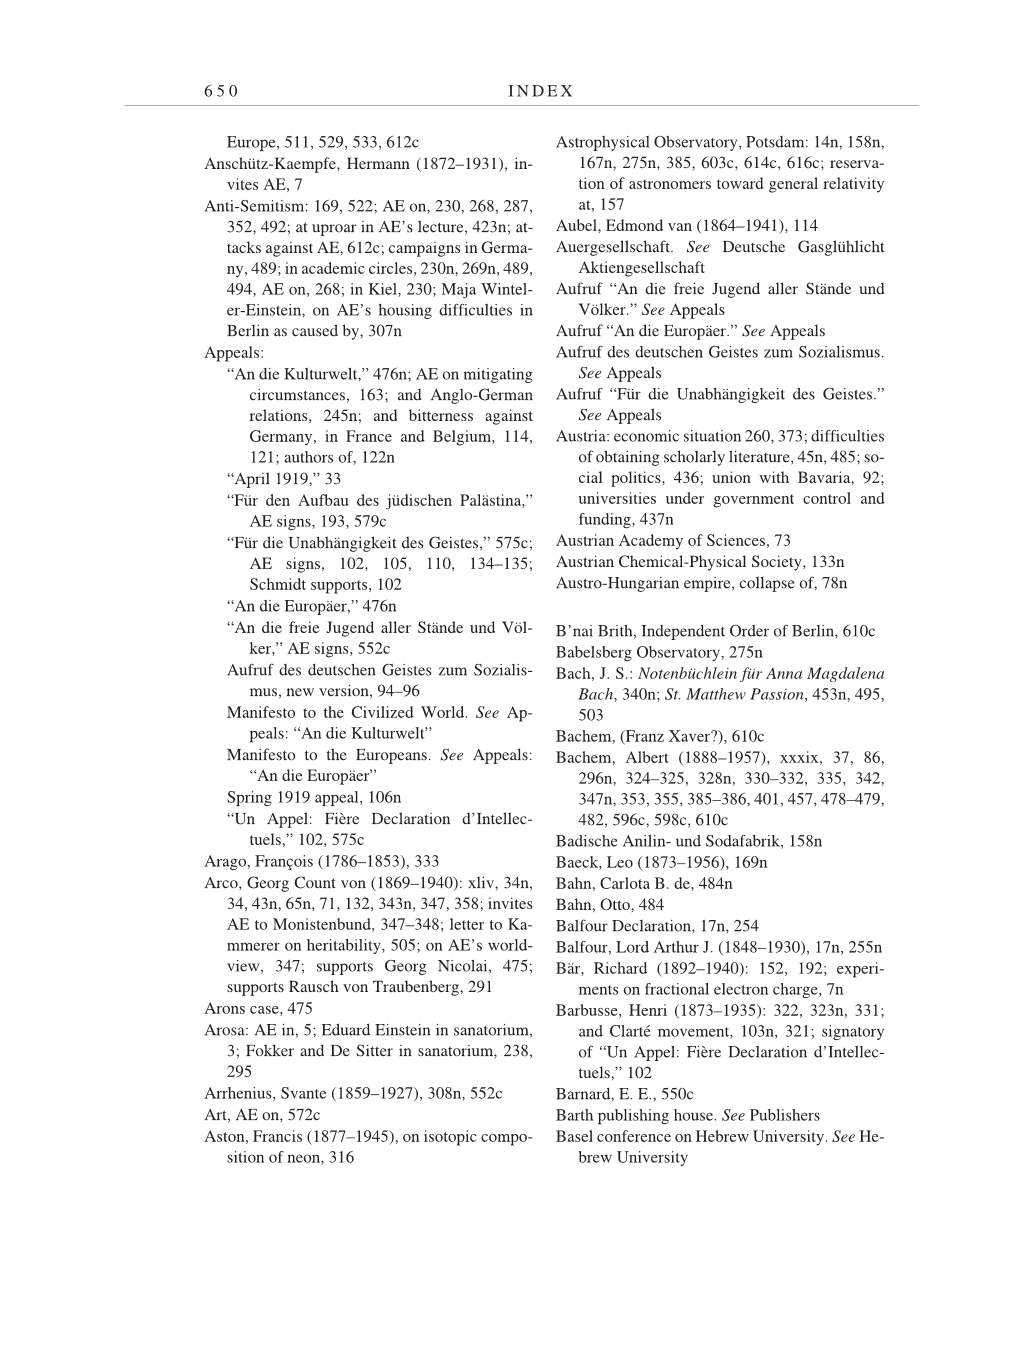 Volume 9: The Berlin Years: Correspondence January 1919-April 1920 page 650